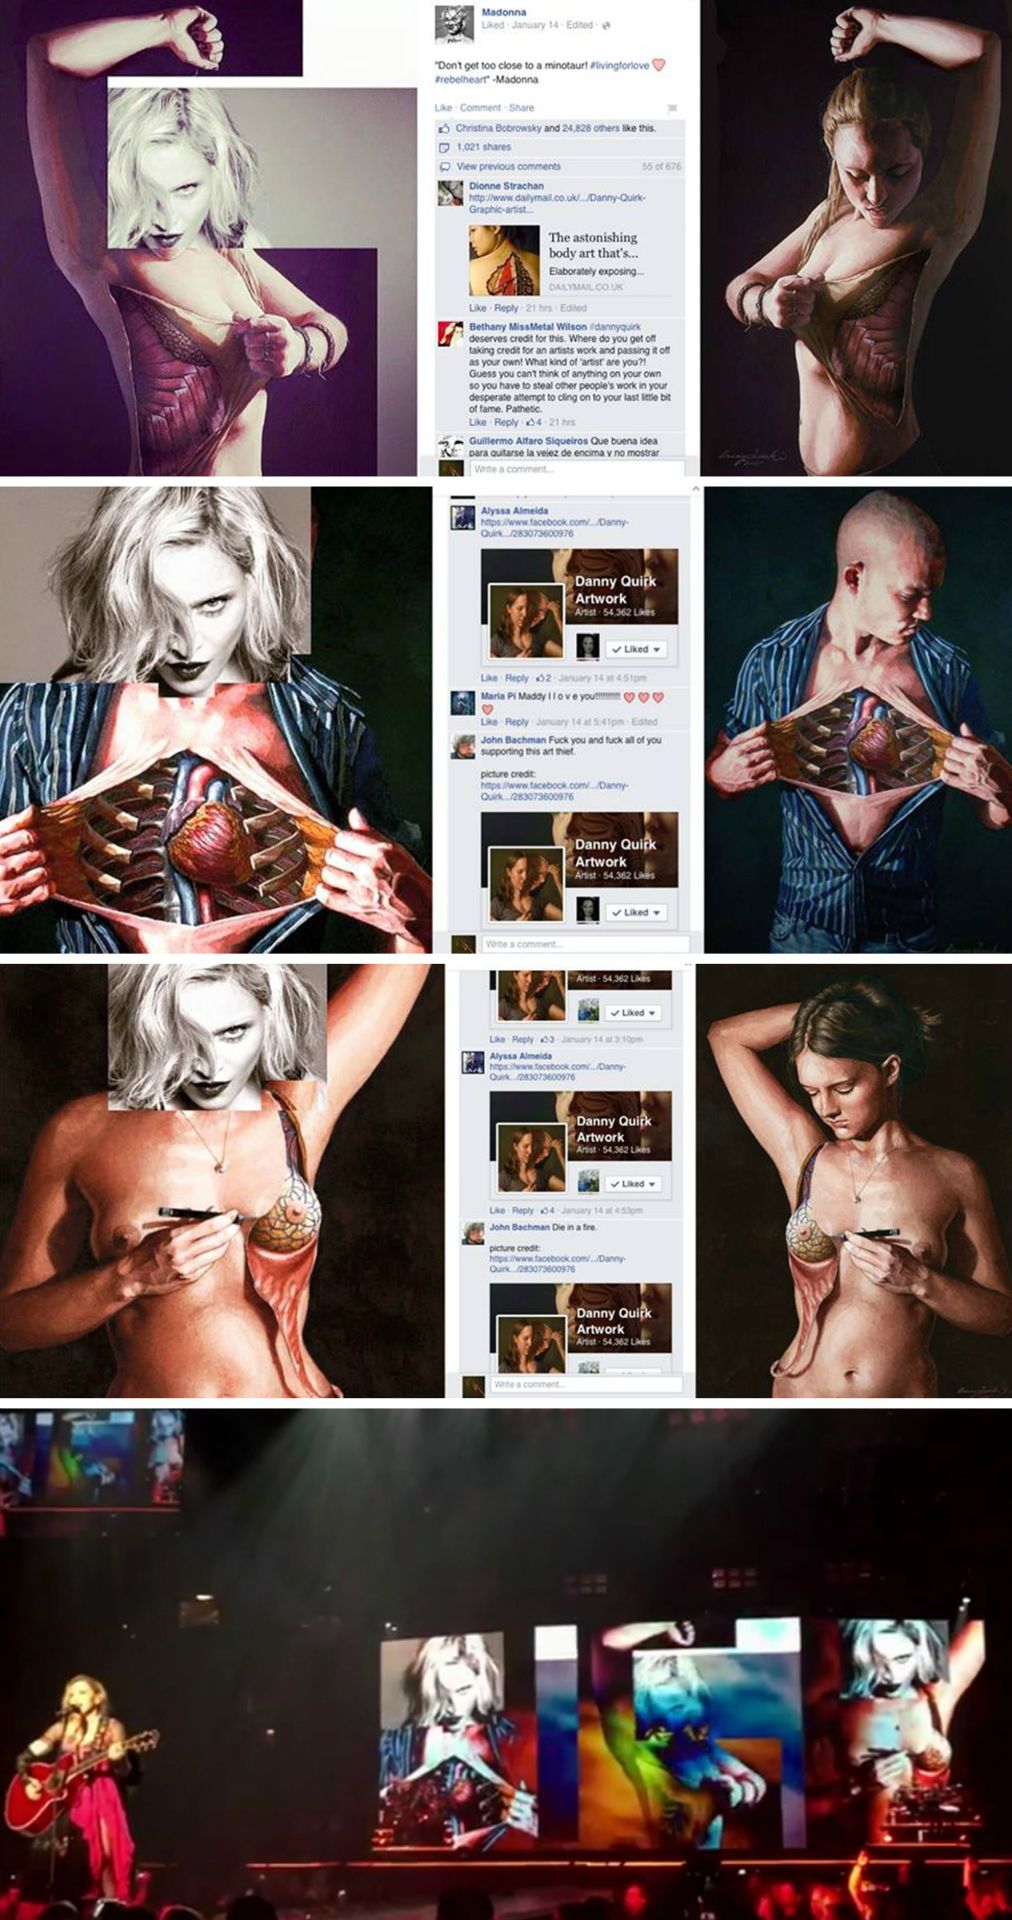 First and foremost &hellip; I just want to deliver an open, and honest “FU¢K YOU” to the “Fair Use Act”, and an ACTUAL &ldquo;what the FUK!?!?&rdquo; to those it protects. Almost a year ago to date (Jan 2015) I awoke to a barrage of  texts stating my work was popping up on Madonna’s FB, IG, and Twitter, with tens of thousands of shares ! ! ! At first, I thought &hellip; “WHOAH! / COOL!&ldquo; but shortly there after, it sunk in.  I contacted her agent Liz Rozenberg, and received no response! In the meantime, I found out digital collage ‘artist’ BessNYC4 was the one who sent the work to her, merging MY ART with her head, and reaping all the benefits.. Things petered out, and I more or less forgot about it; u n t i l &hellip; early Oct 2015. I found out (for all intents and purposes) MY ART was used in her concerts, despite my attempts at getting proper credit acknowledgment,  etc. I made a post / got a lawyer, and was hoping for justice. Lawyer said “PULL THE POST!” and it was determined “Fair Use Act” which protected THEM / HER and the articles covering the story made ME out to be the bad guy. What the fuk? HOW? Anyone with eyes can see they did &hellip; anyhow, this is a rant how WE ARTISTS are taken advantage of, as you can see in THREE of my pieces &hellip; . #dannyquirkartwork #madonna #fairuseact #bullshit